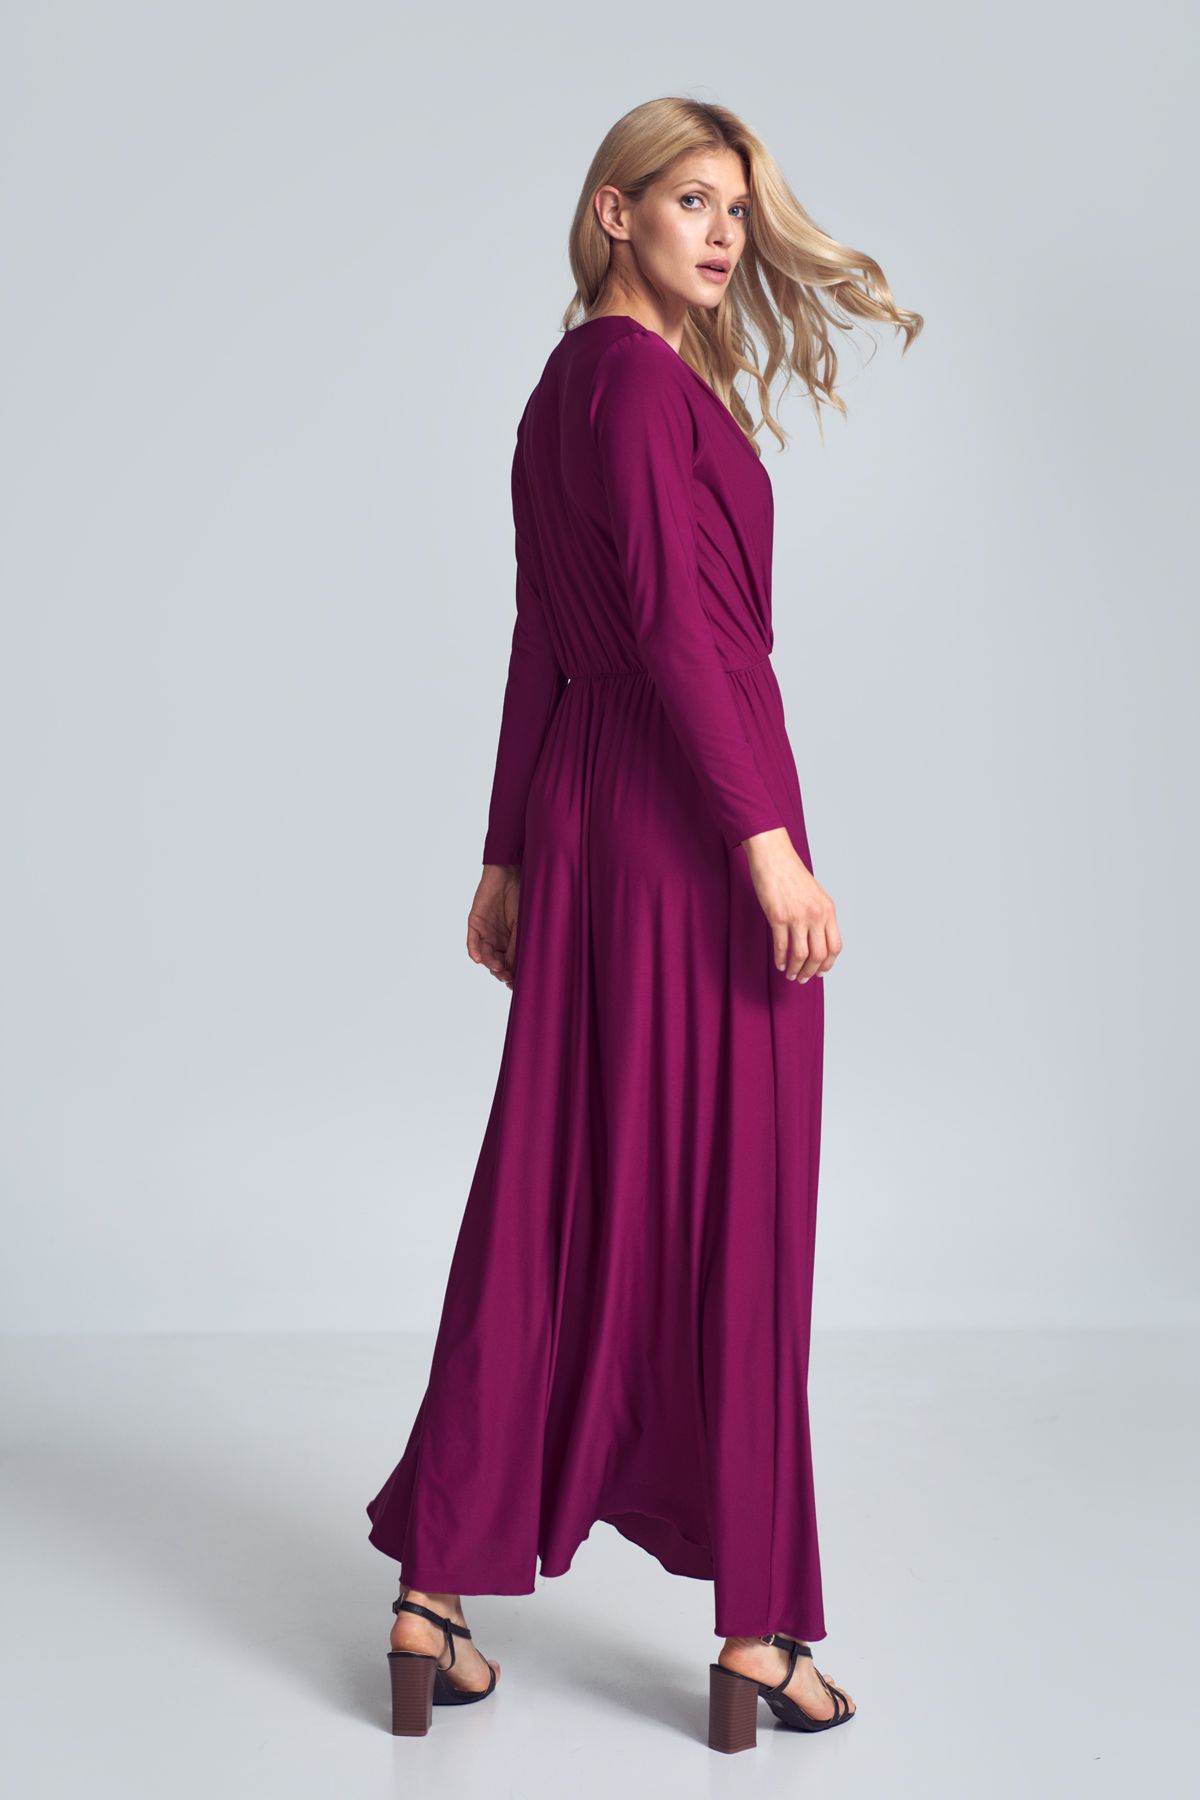 Fuchsia maxi dress with long sleeves, wrap creased neckline, elasticated band sewn in the waist.